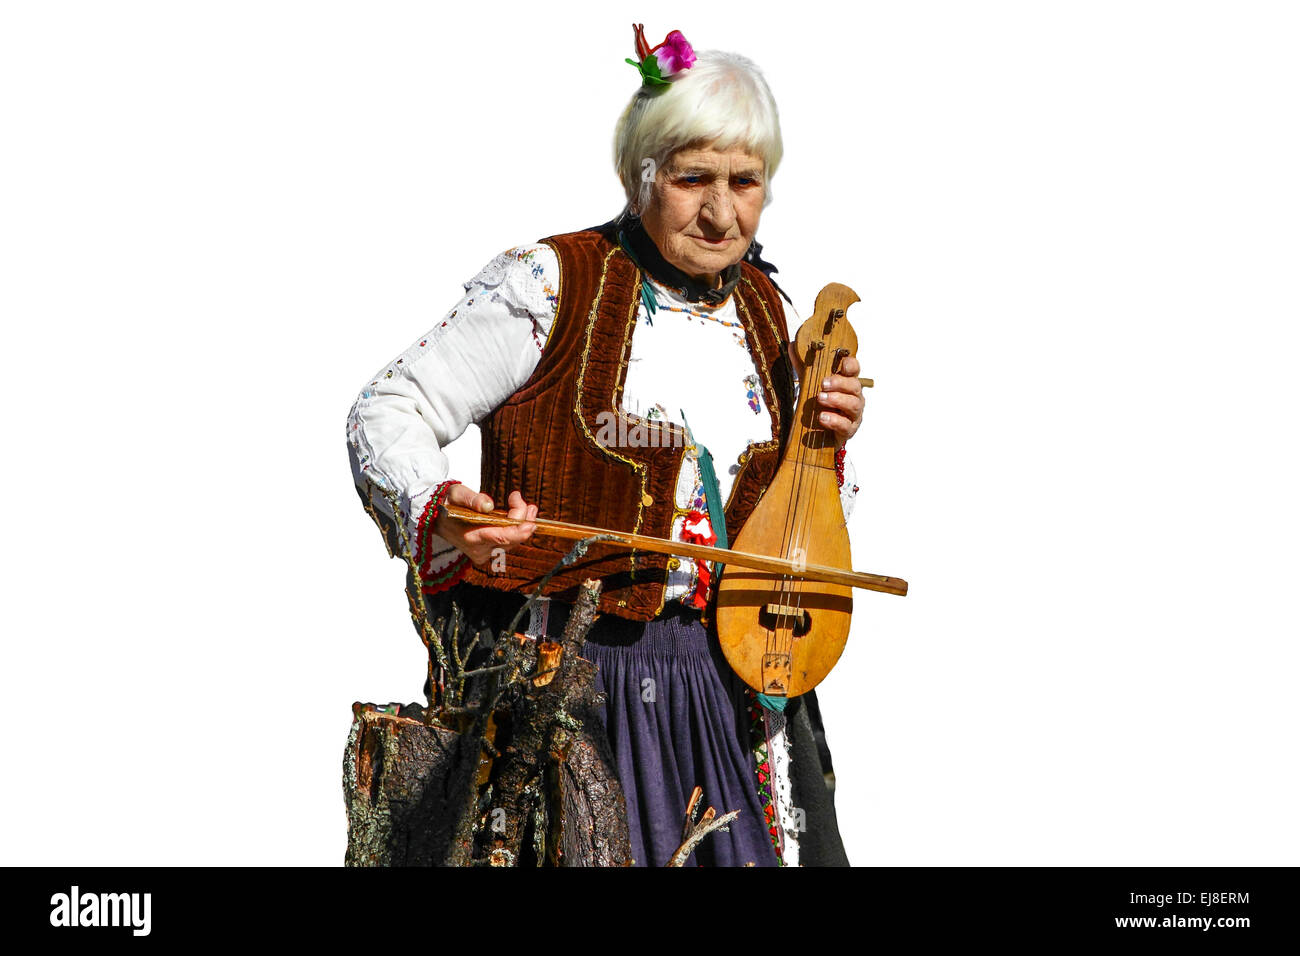 Old folk lady playing the fiddle Stock Photo